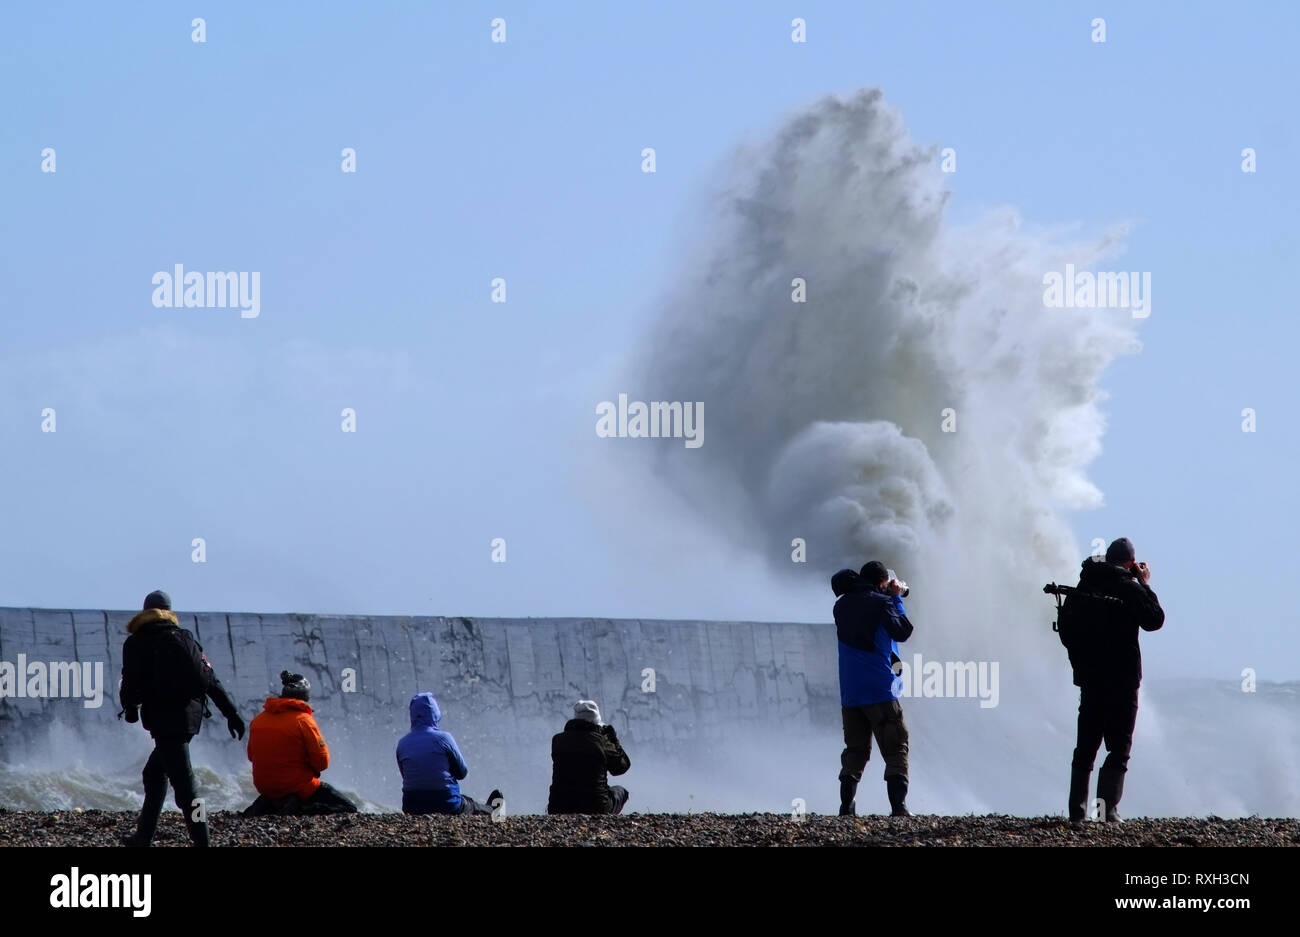 Newhaven, East Sussex, UK. 10th March 2019. Massive waves smash into the cast iron lighthouse at Newhaven, East Sussex, as gale force winds whip the South coast. © Peter Cripps/Alamy Live News Stock Photo